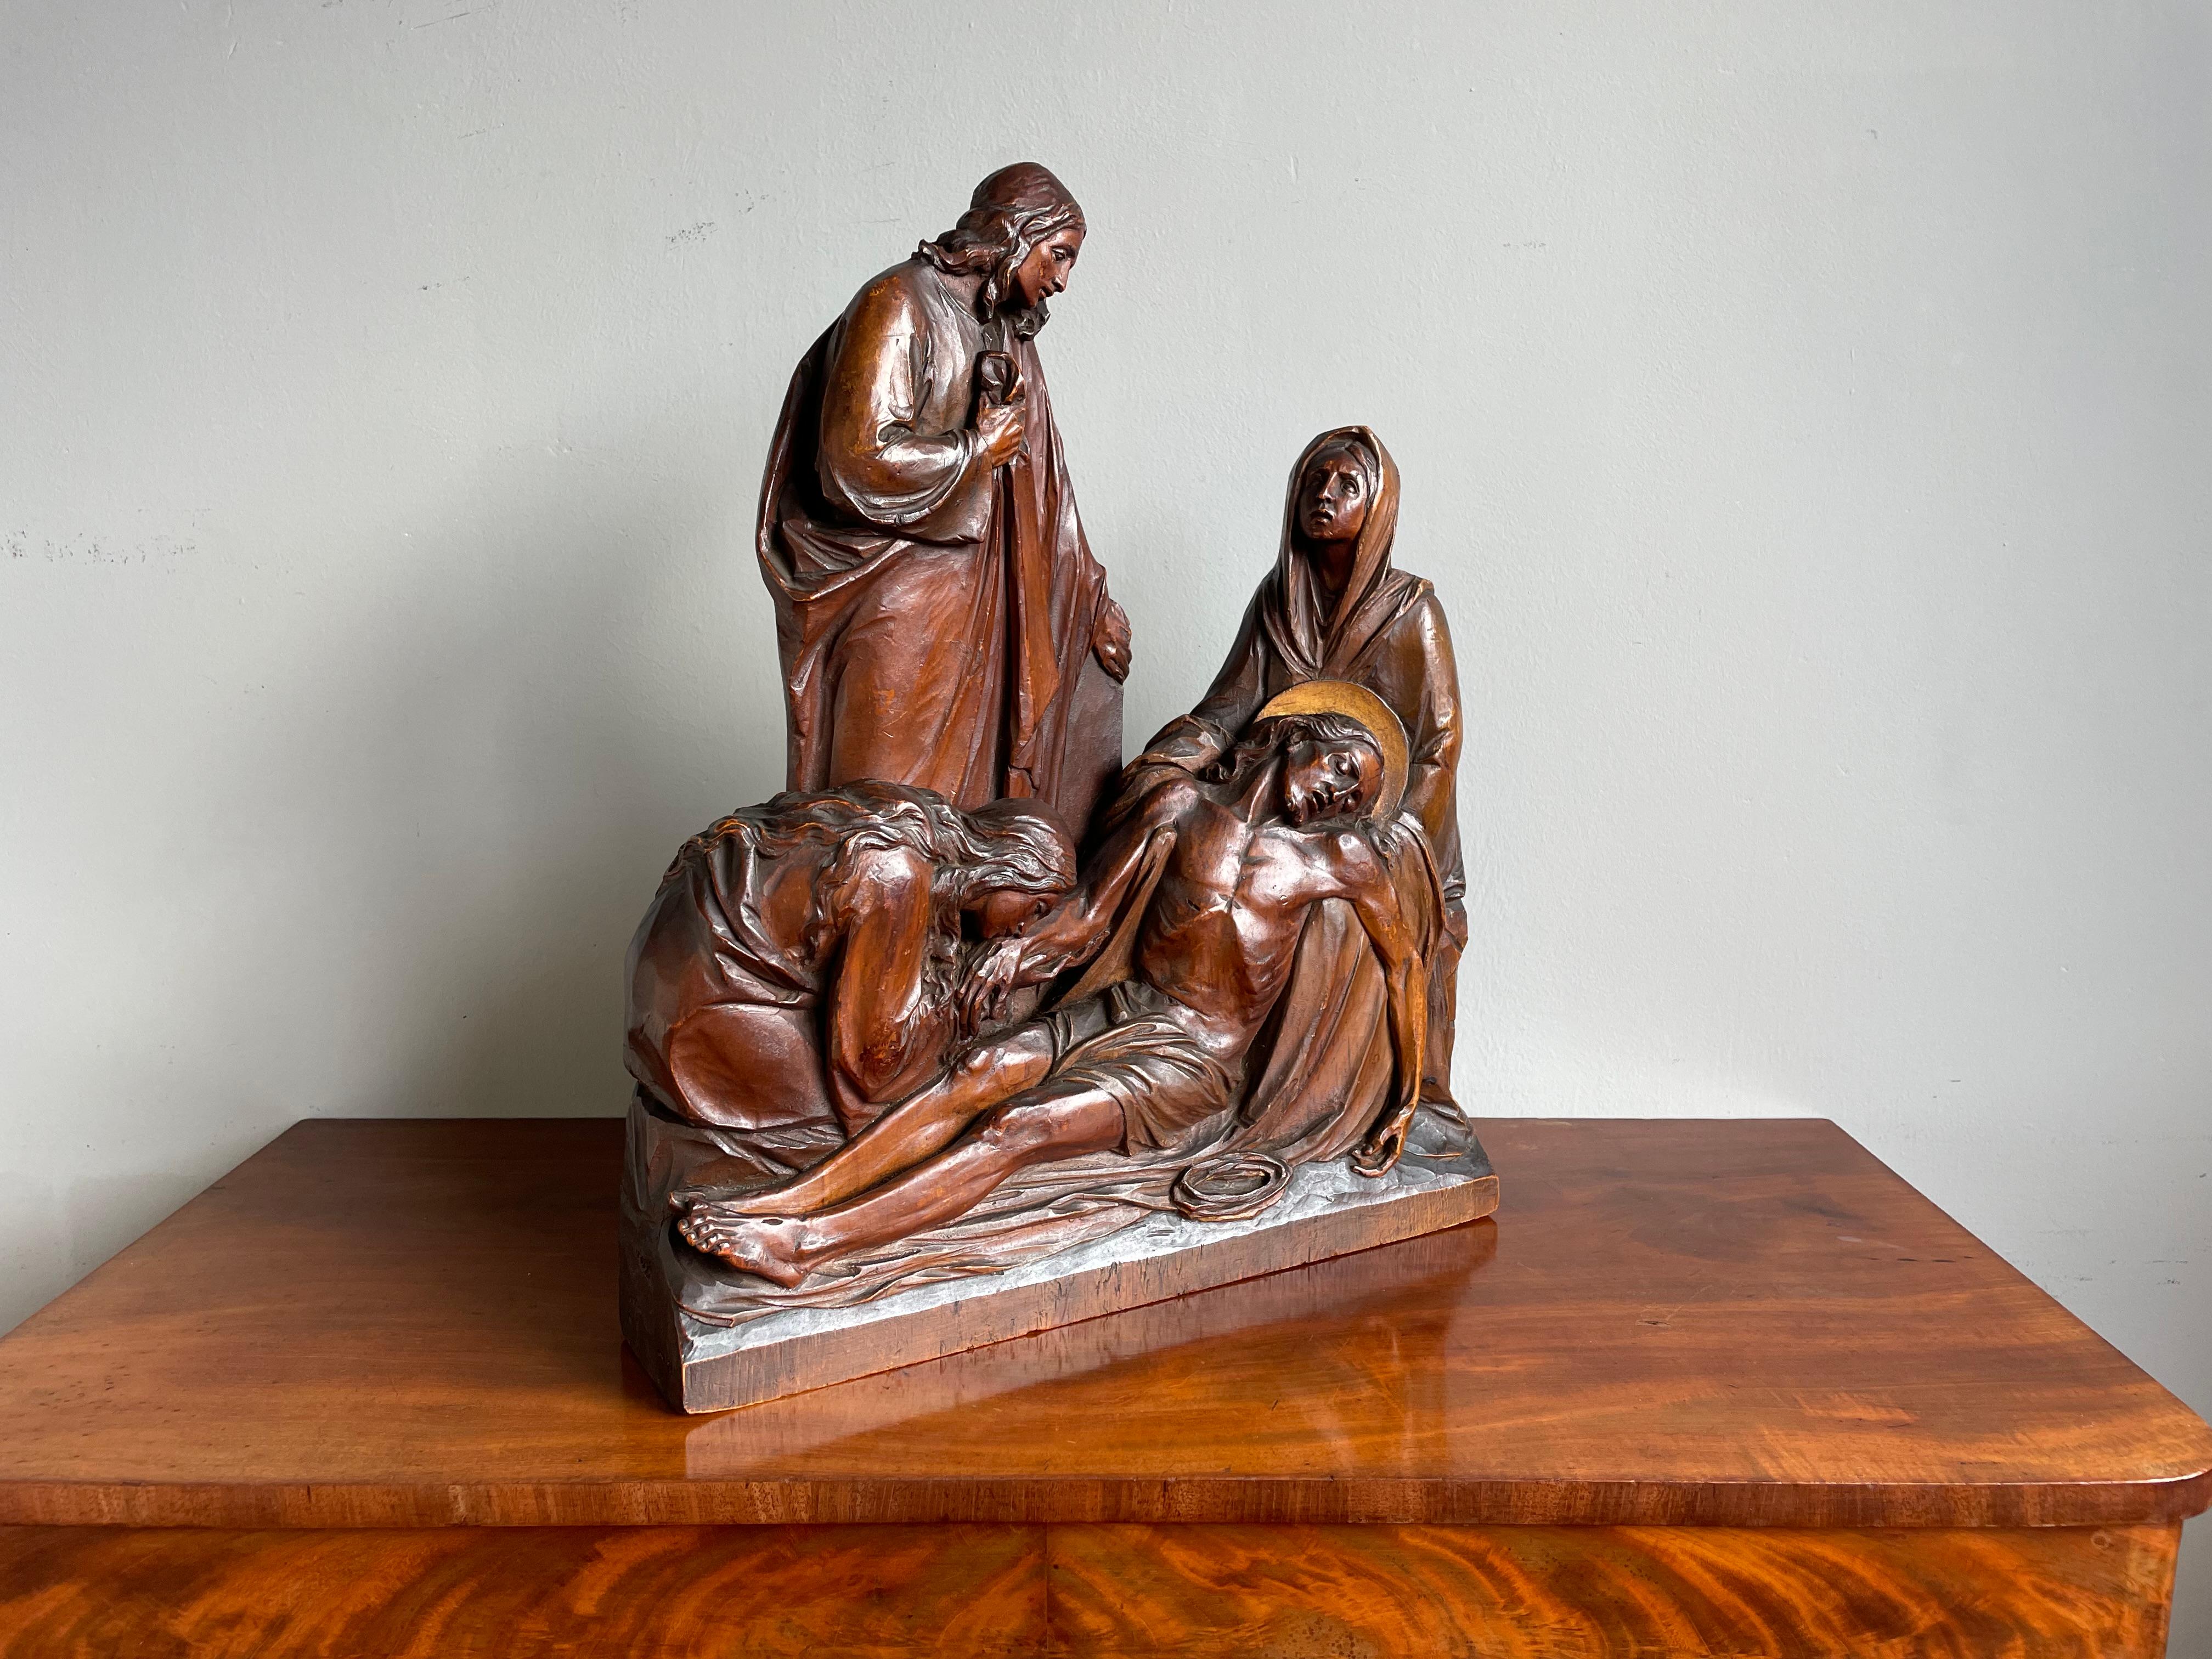 Stunning antique, hand carved church sculpture of the pieta from the 1800s.

If you are a collector of antique and top-quality works of art in general and of rare religious artefacts in particular then this top quality carved wooden sculpture from